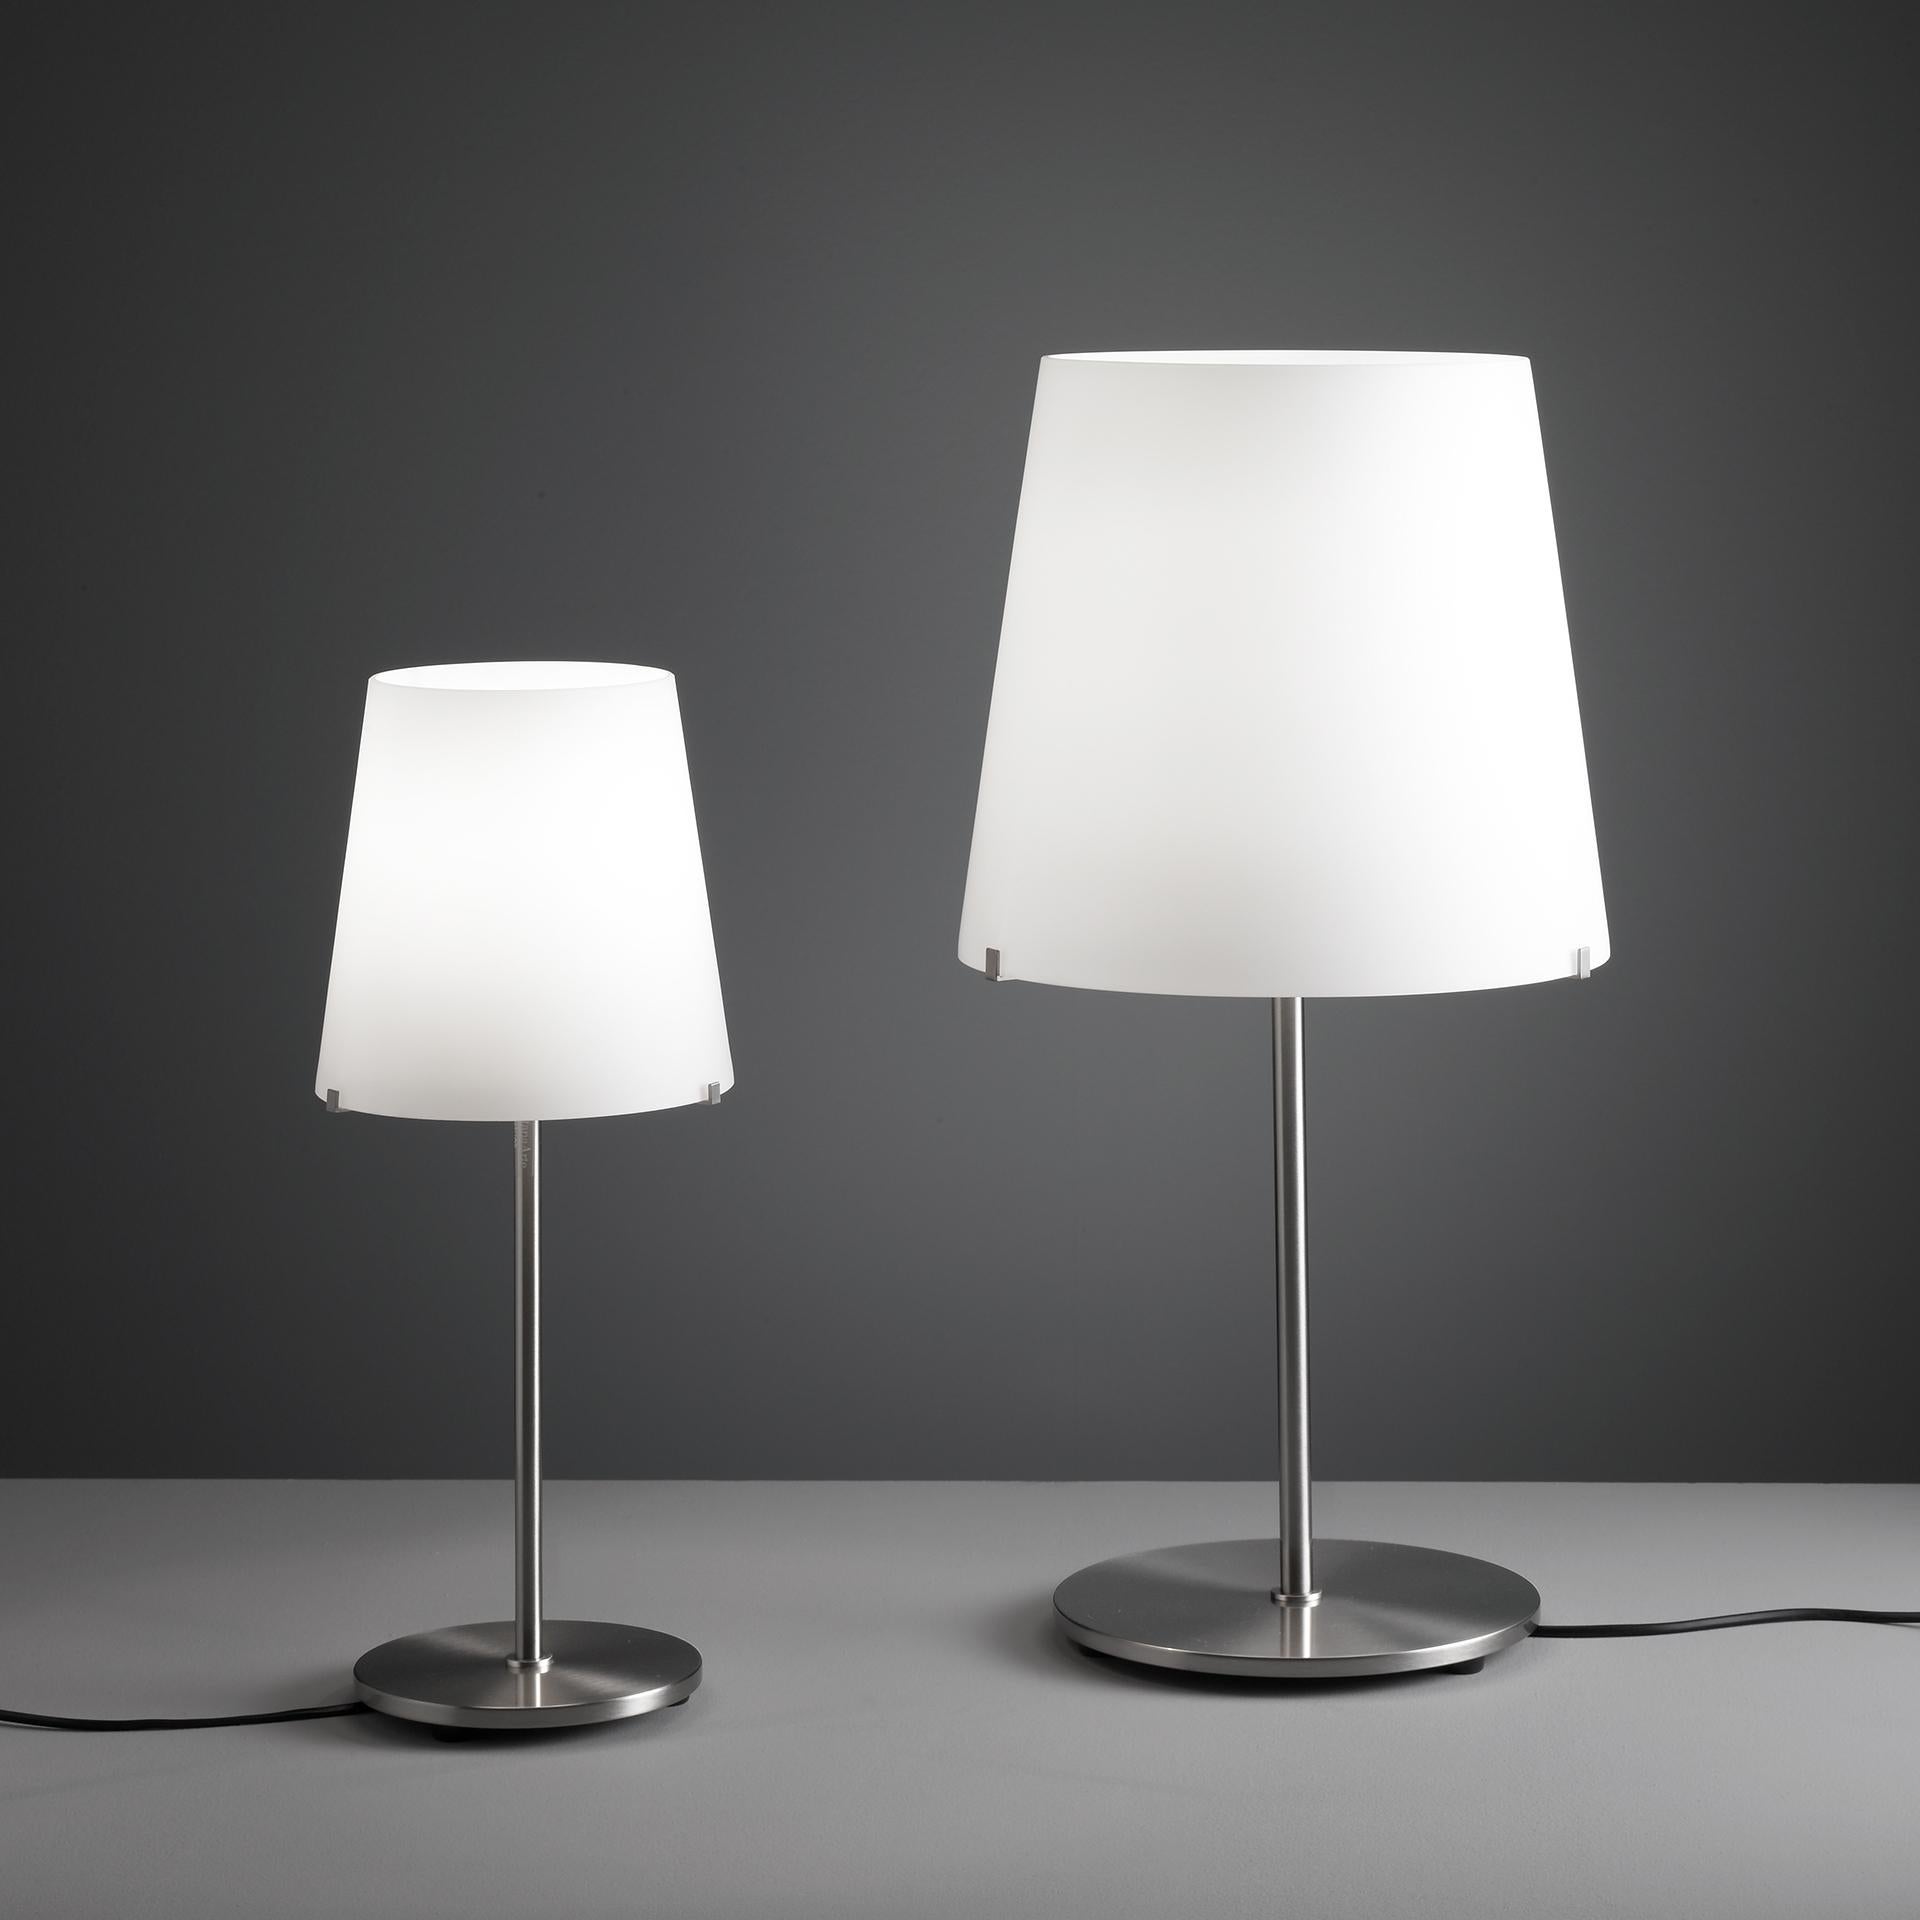 Family of floor and table lamps with diffuser in frosted white blown glass and structure in nickel-plated metal.

The diffuser is available in white frosted blown glass with a nickel-plated metal frame and black power cable and switch.